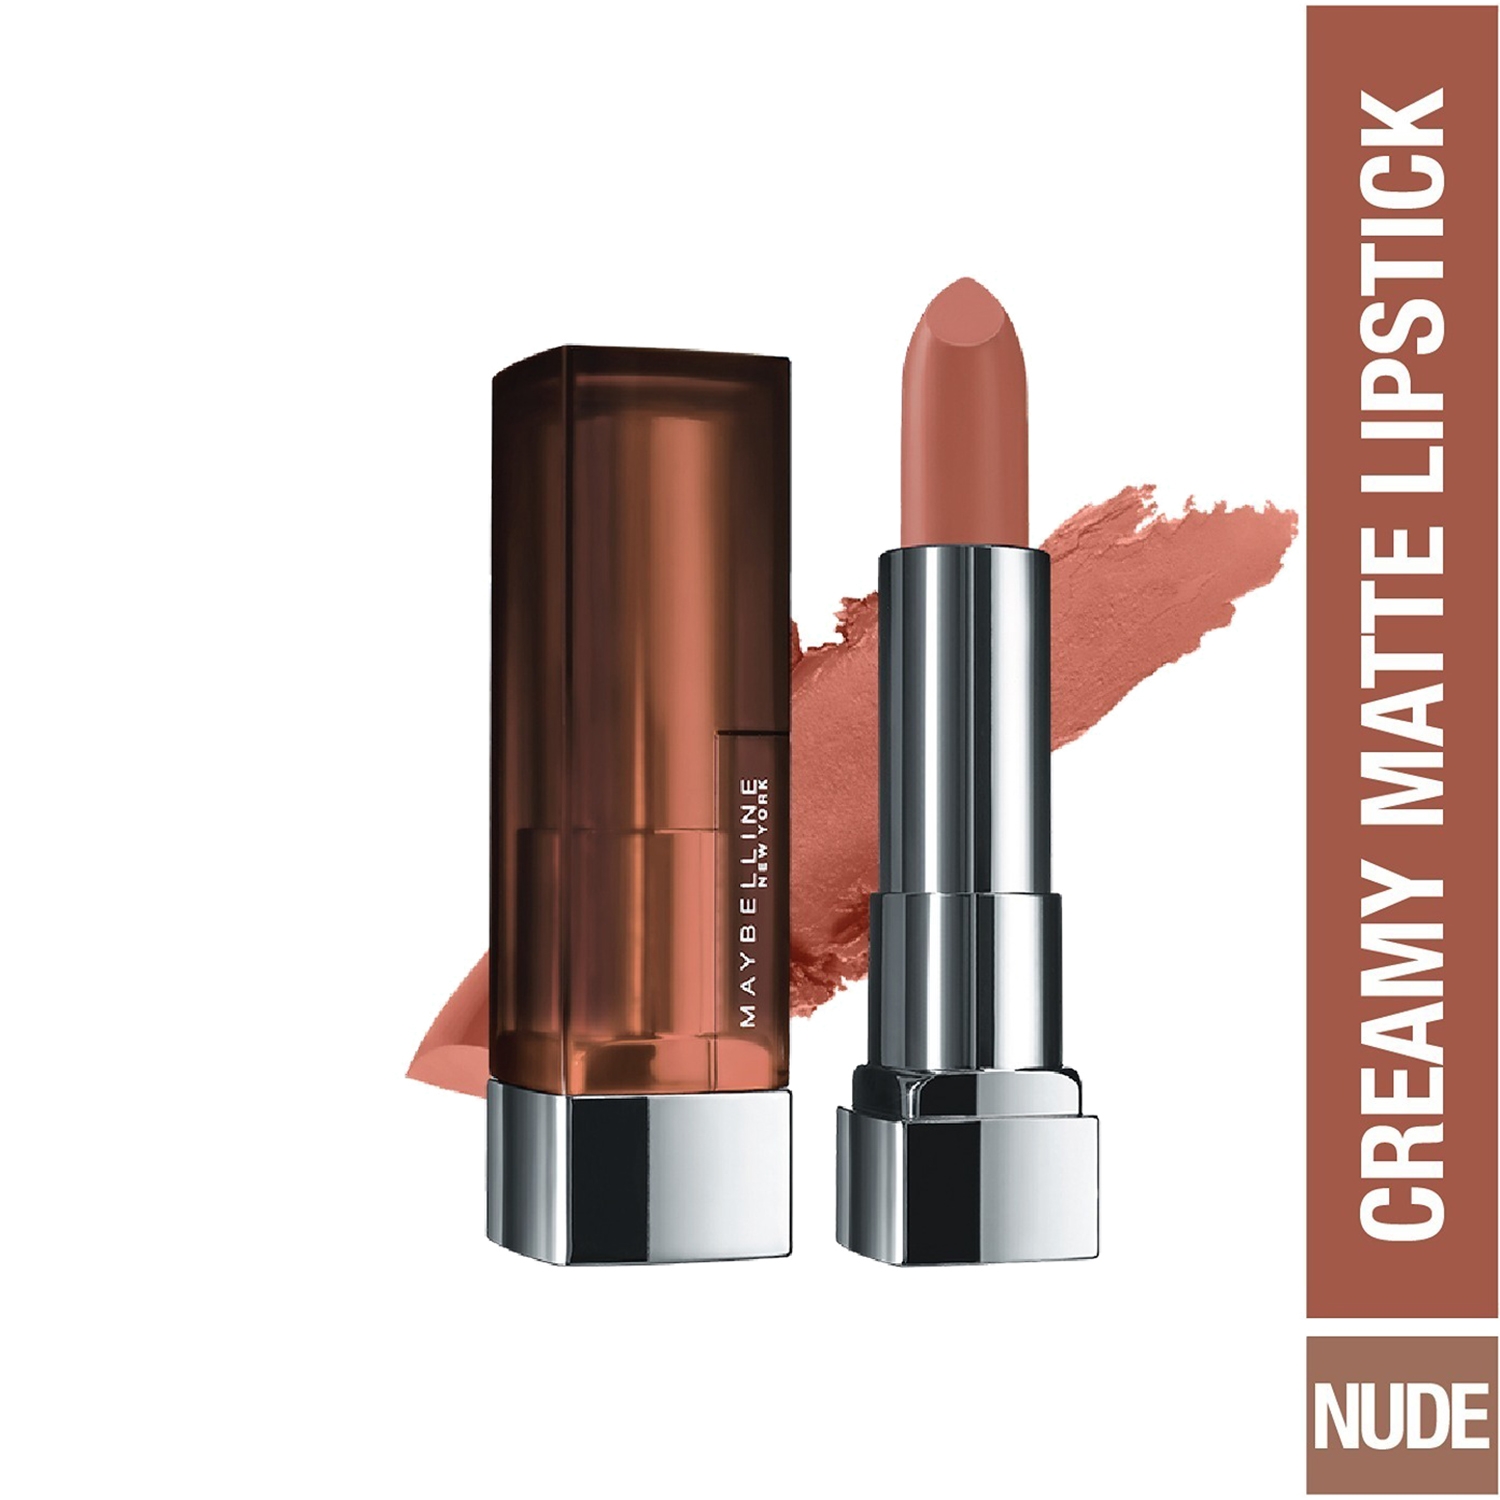 Maybelline New York Color Sensational Inti-Matte Nude Lipstick - 506 Toasted Brown (3.9g)